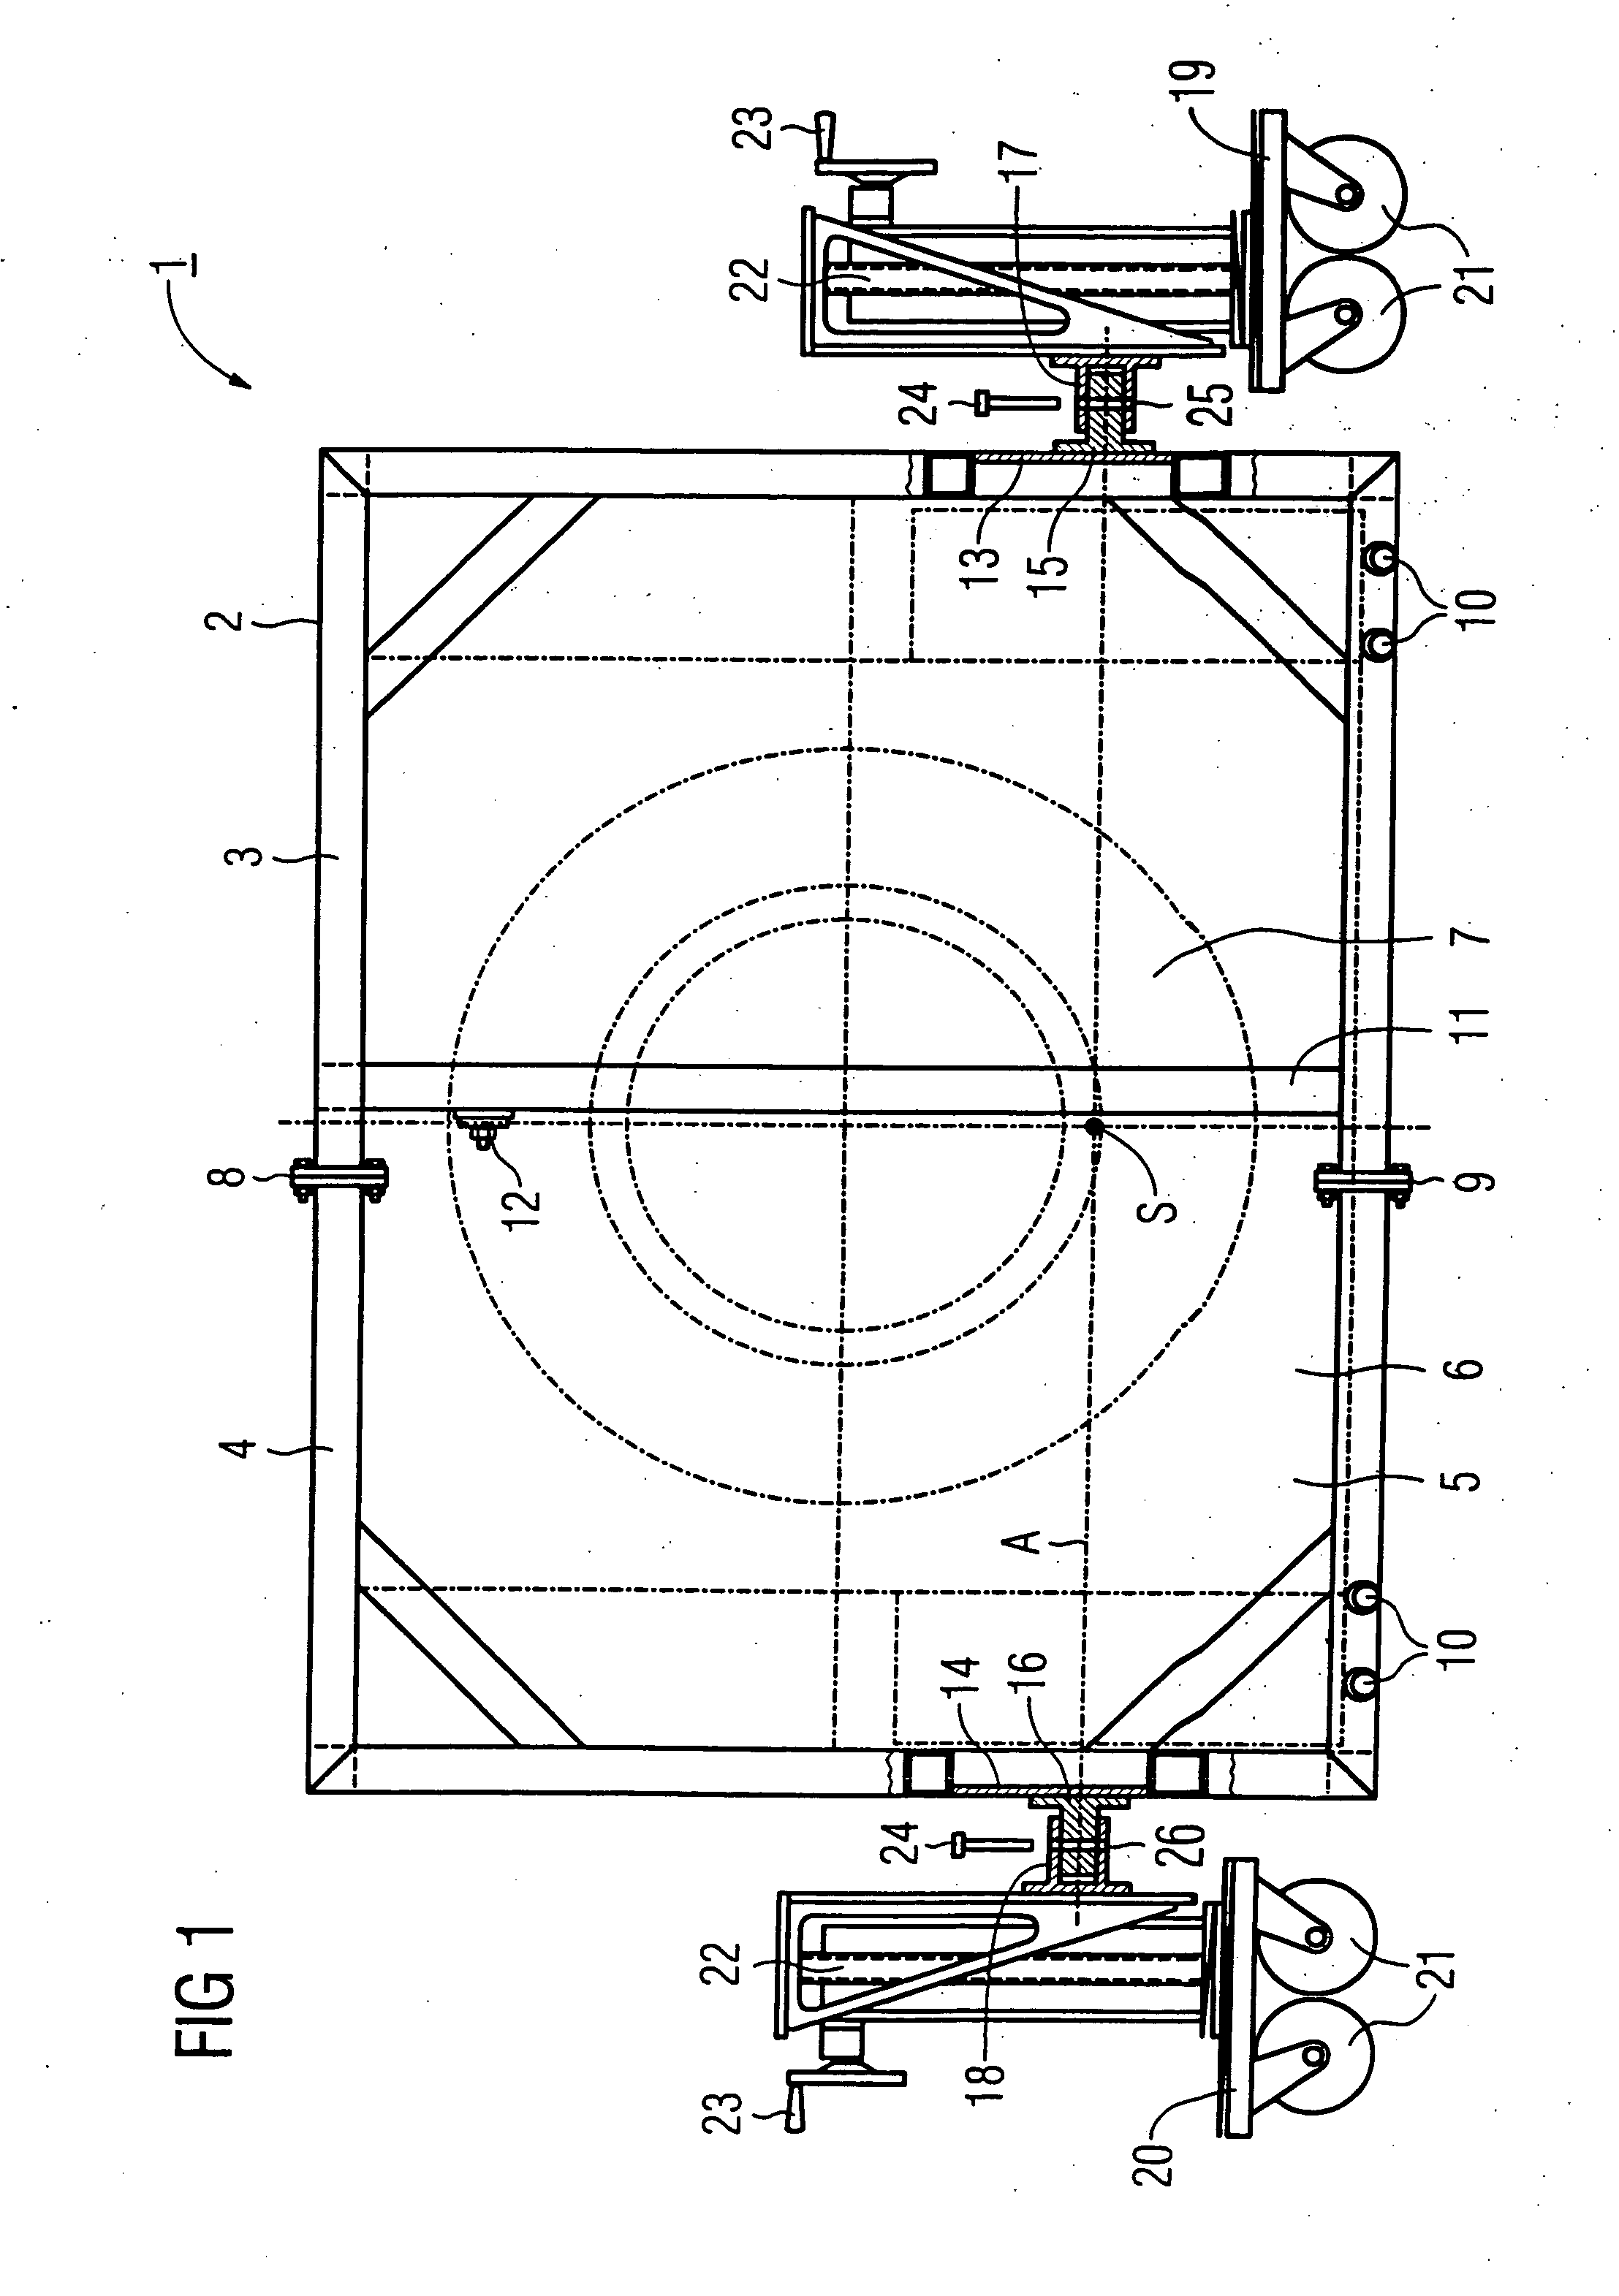 Method and device for moving a tomography apparatus gantry